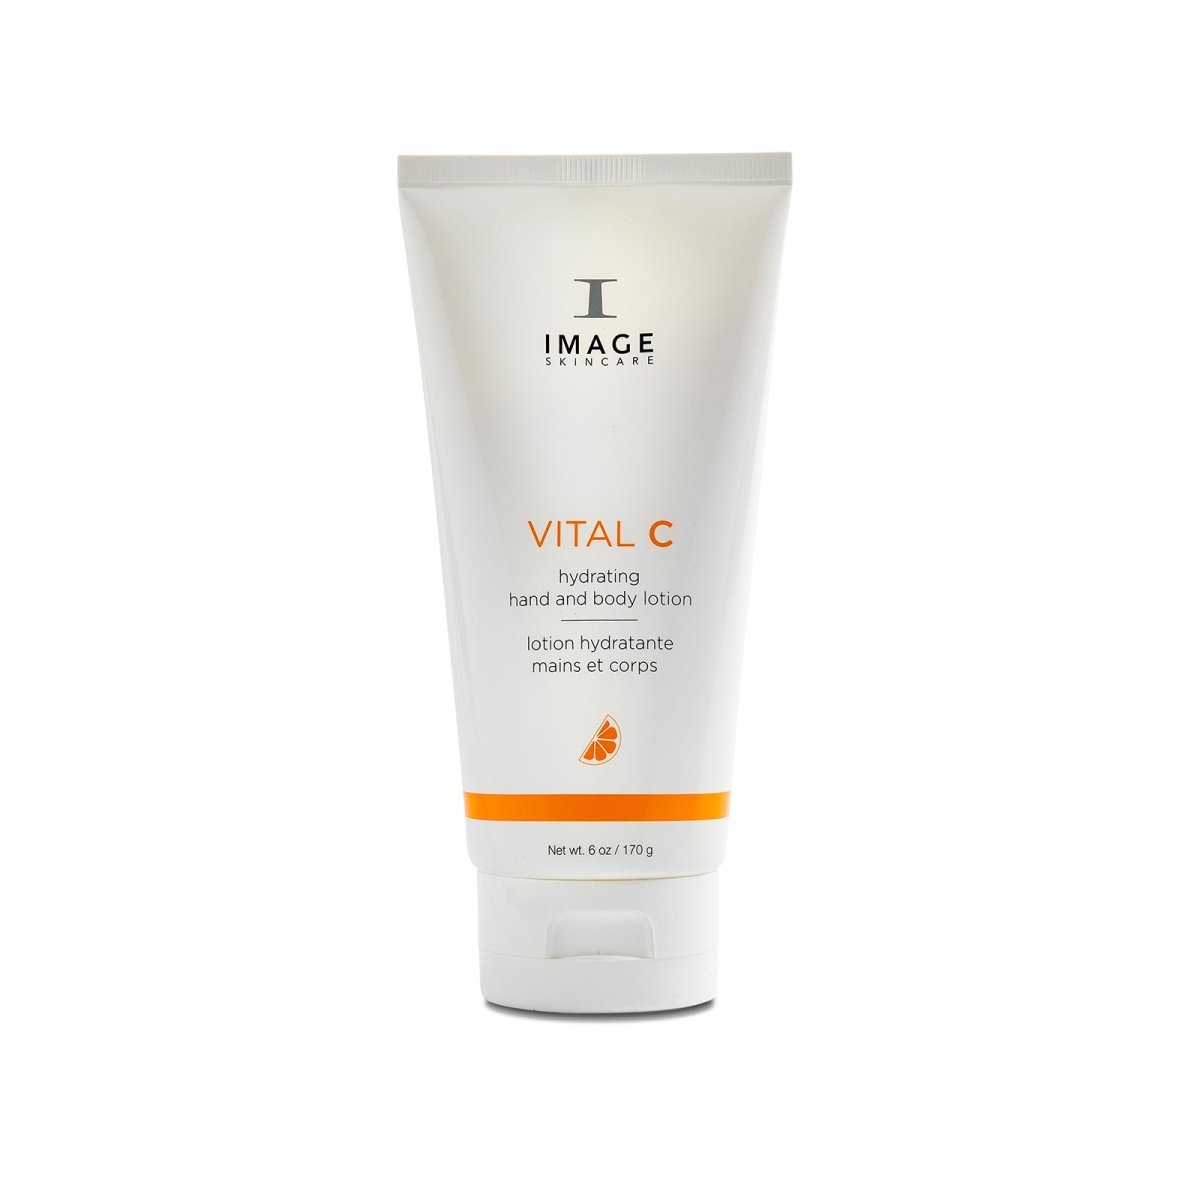 IMAGE Skincare Vital C Hydrating Hand and Body Lotion - SkincareEssentials